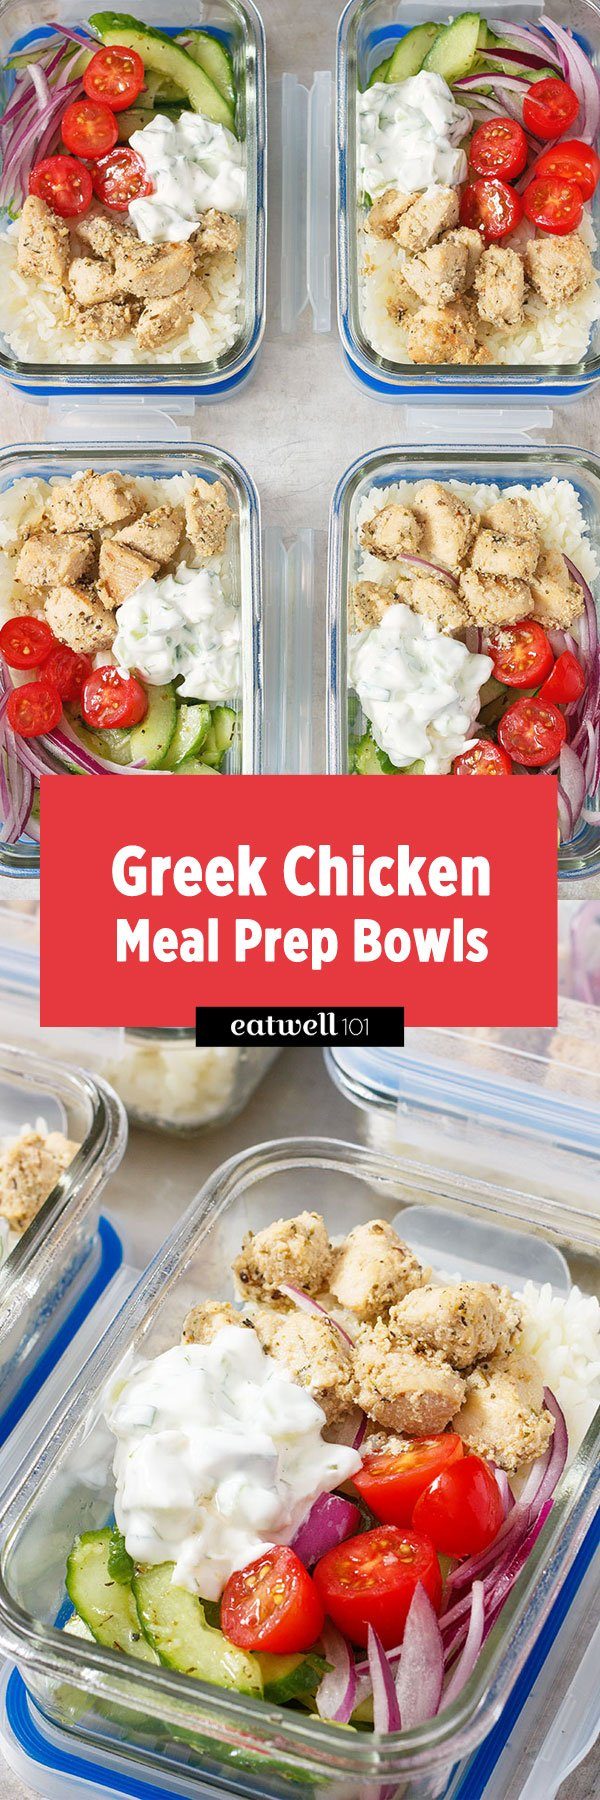 Greek Chicken Meal Prep Bowls - Cooks Well With Others